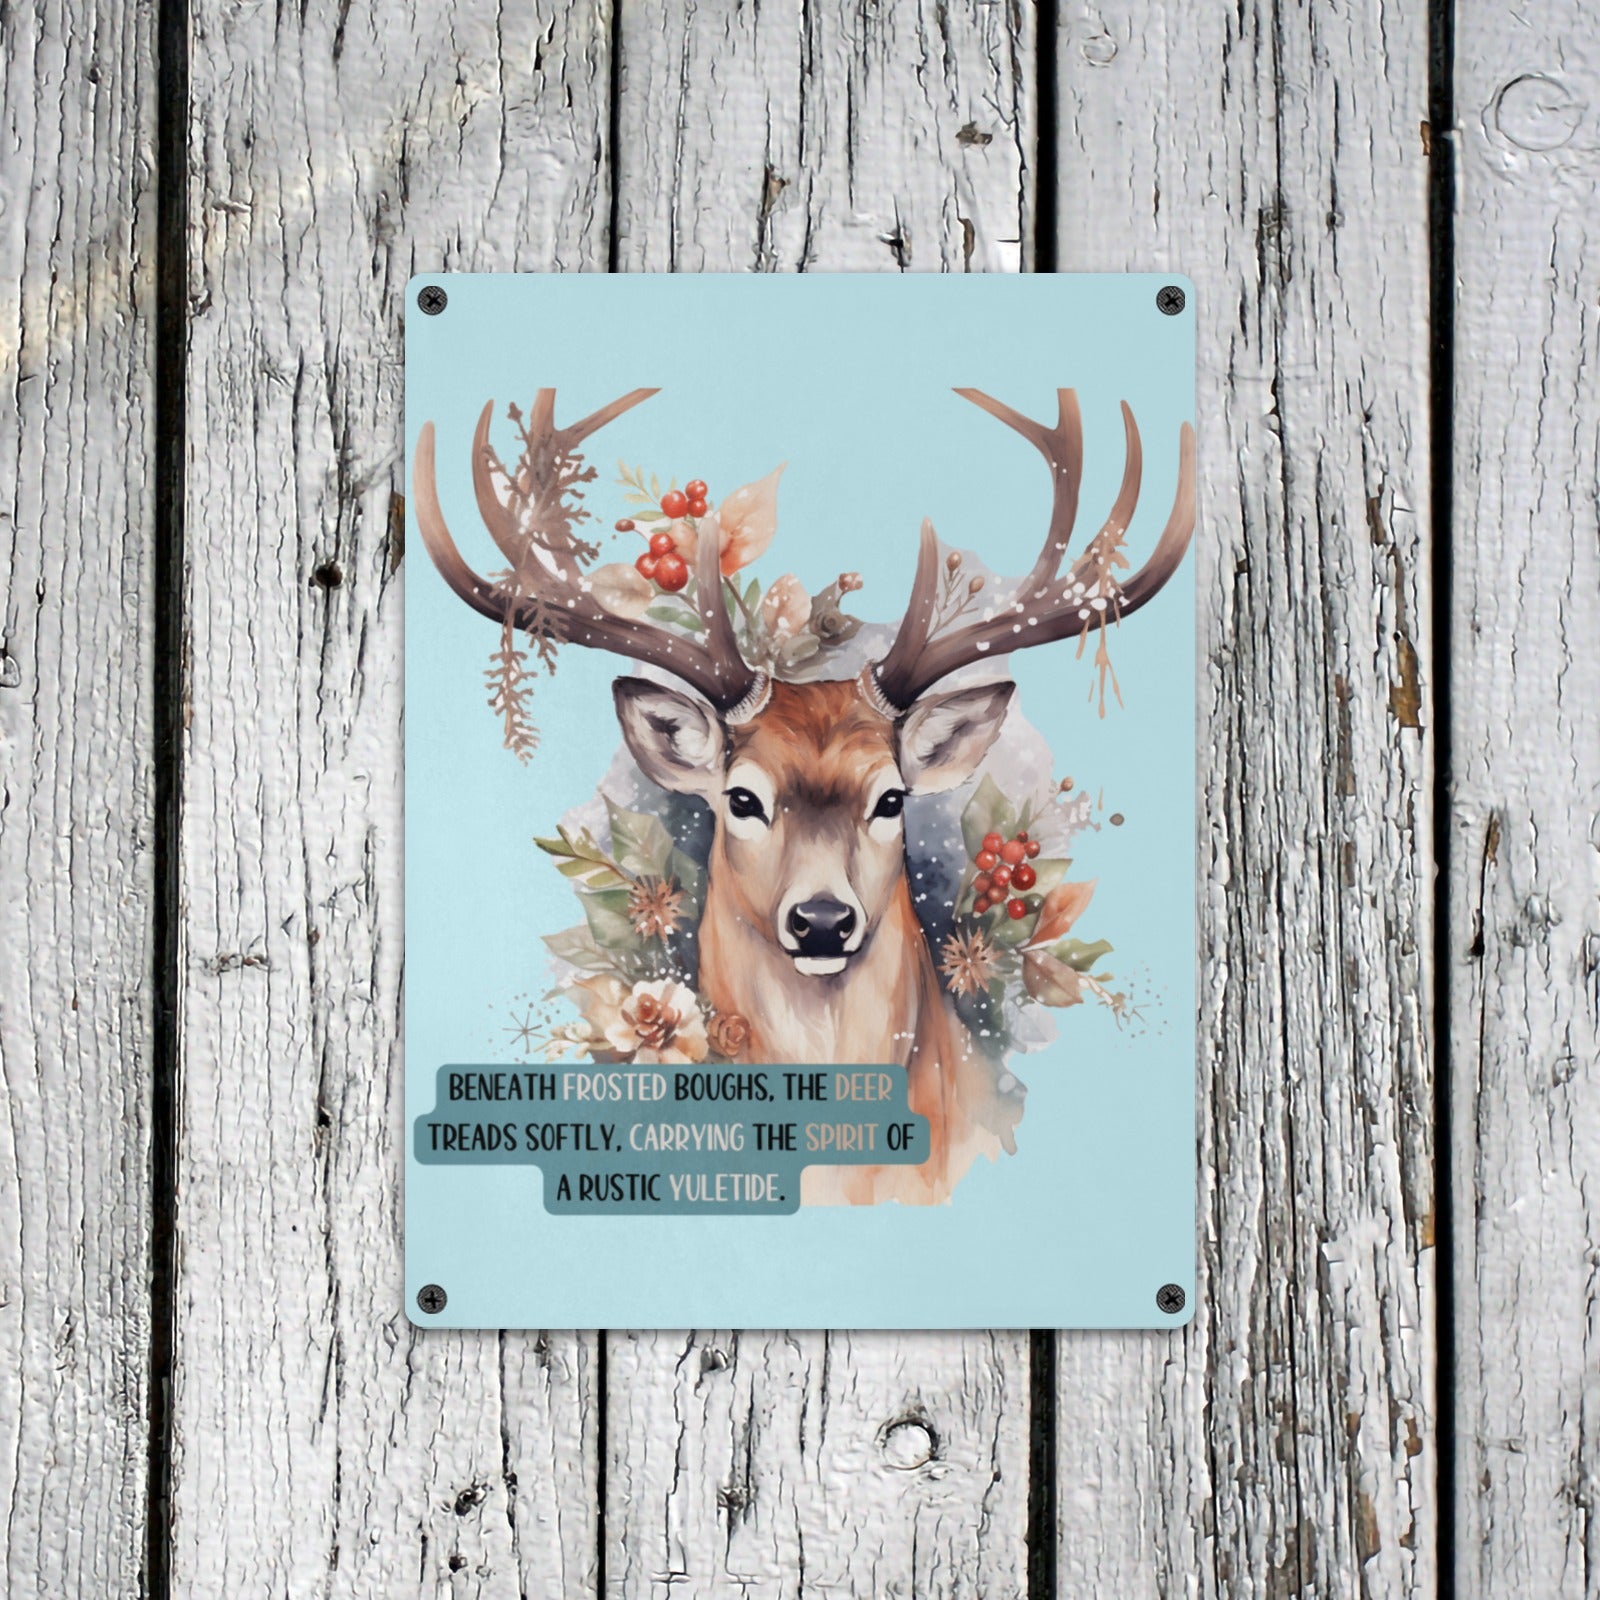 Cranberry Lake Designs "Hold onto Your Tinsel, Christmas is Here" Reindeer Metal Sign | 12x16" Indoor/Outdoor Holiday Decor